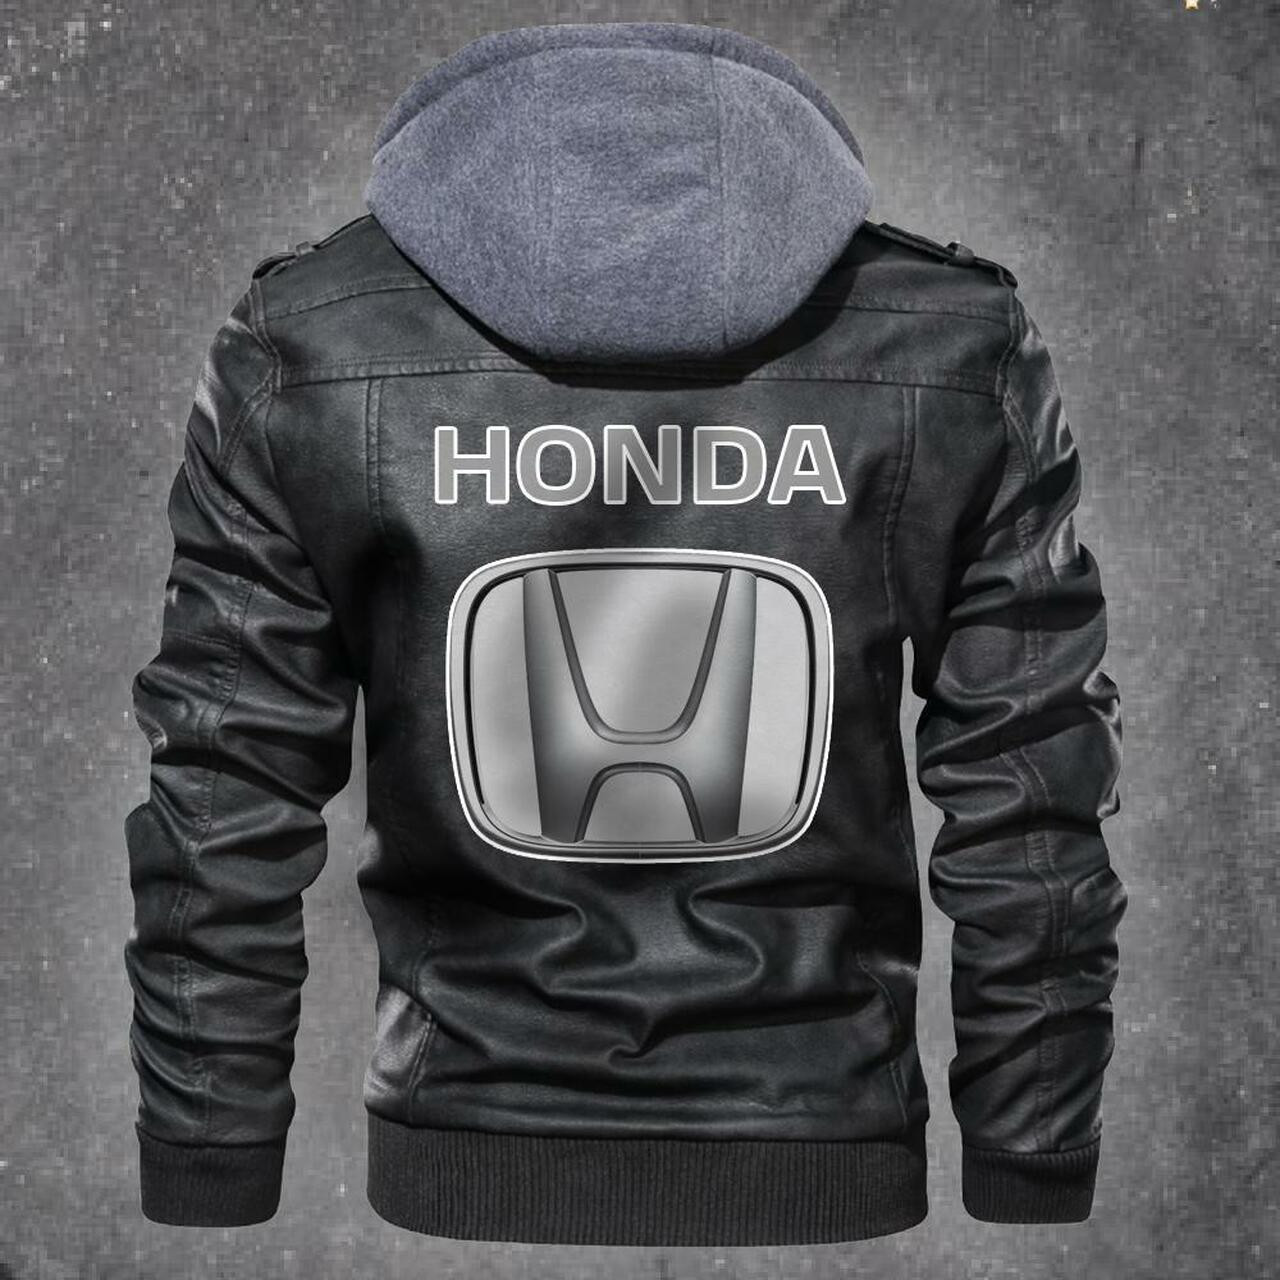 This leather Jacket will look great on you and make you stand out from the crowd 419